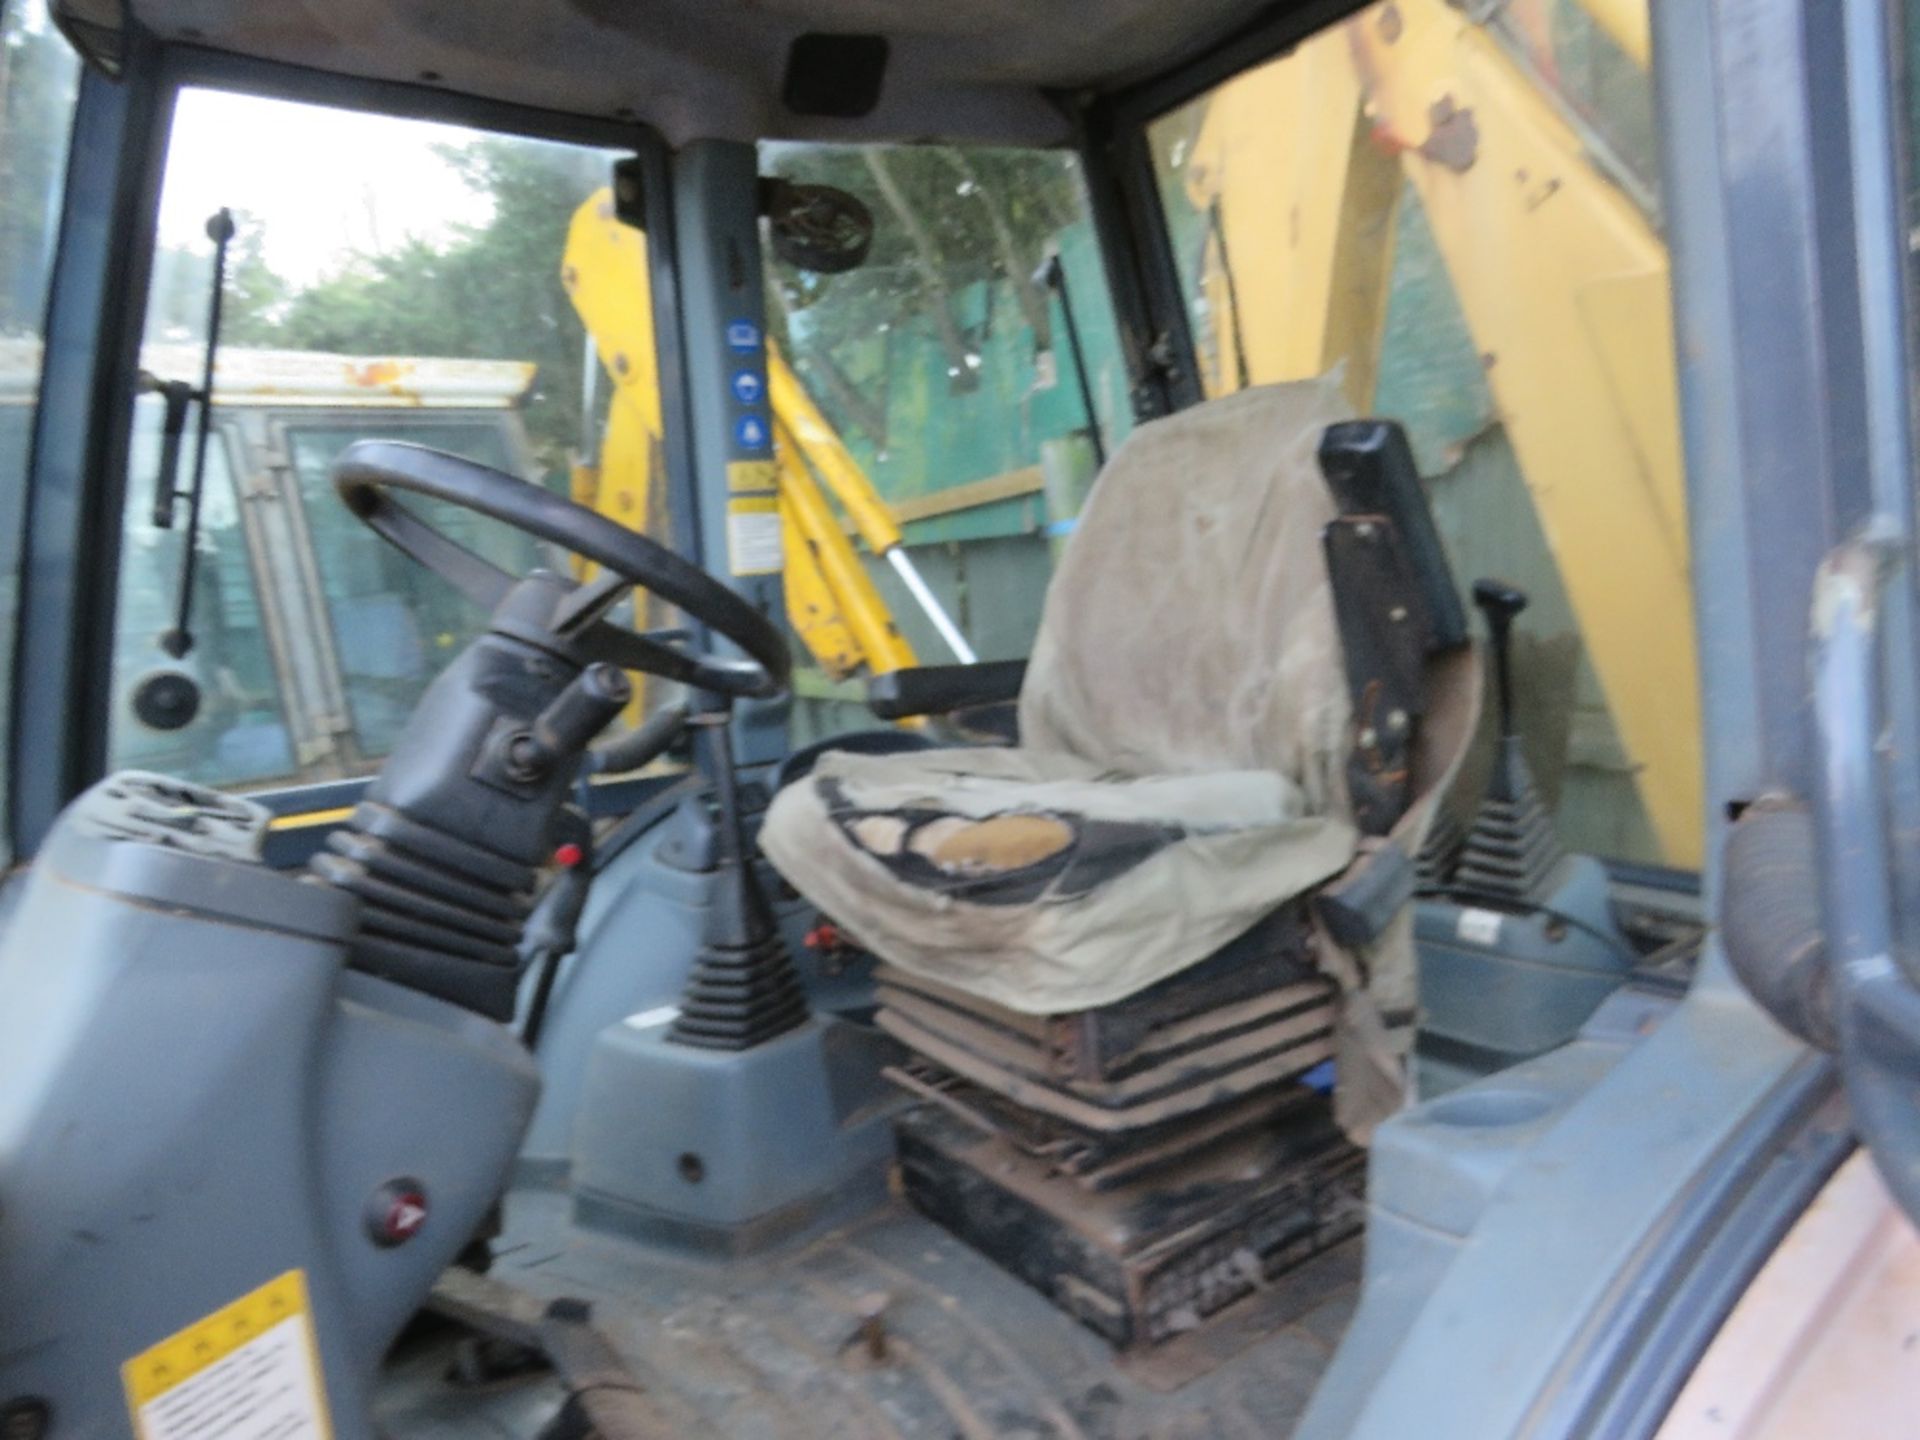 NEW HOLLAND 85 BACKHOE LOADER, REG: R978 JBJ. 8542 REC HOURS. WITH 4IN1 BUCKET AND ONE REAR BUCKET. - Image 6 of 10